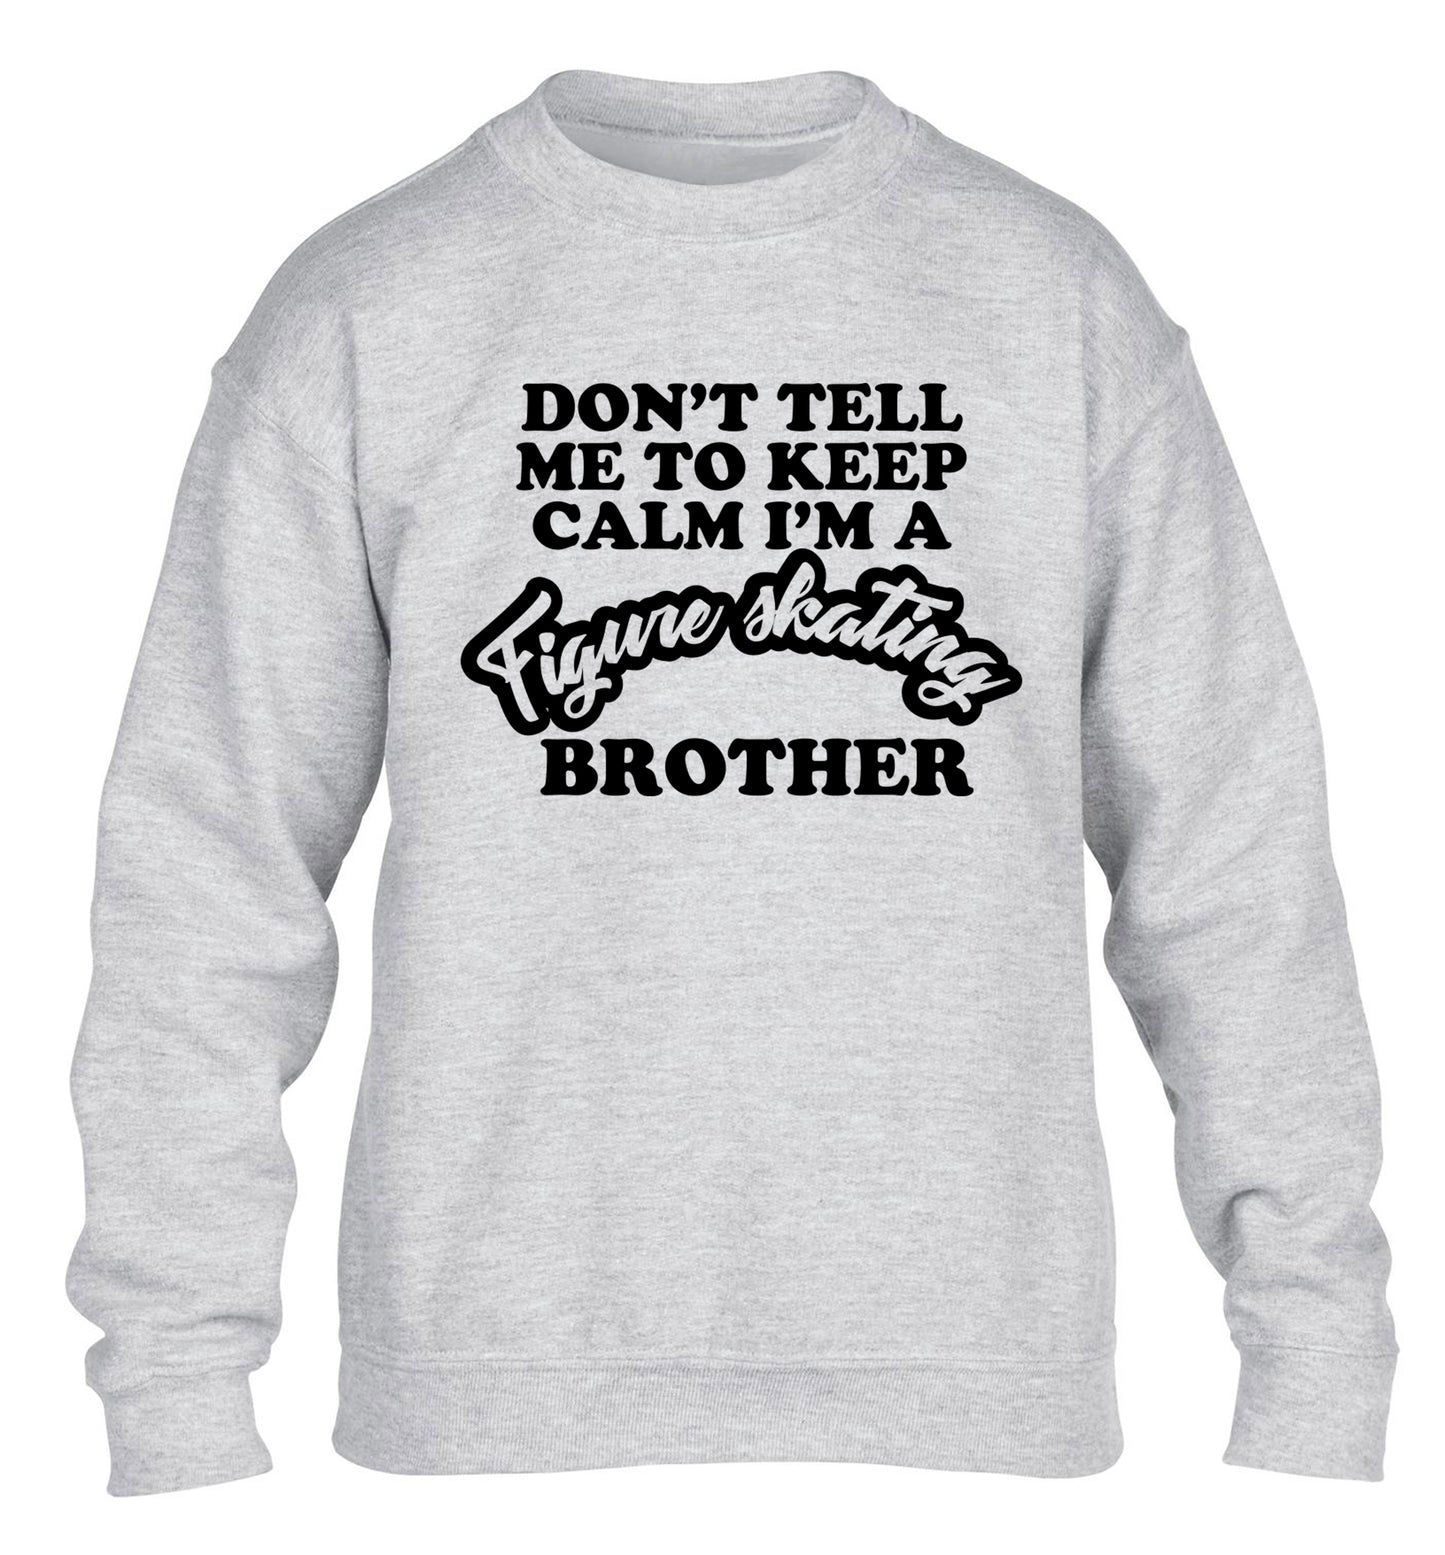 Don't tell me to keep calm I'm a figure skating brother children's grey sweater 12-14 Years